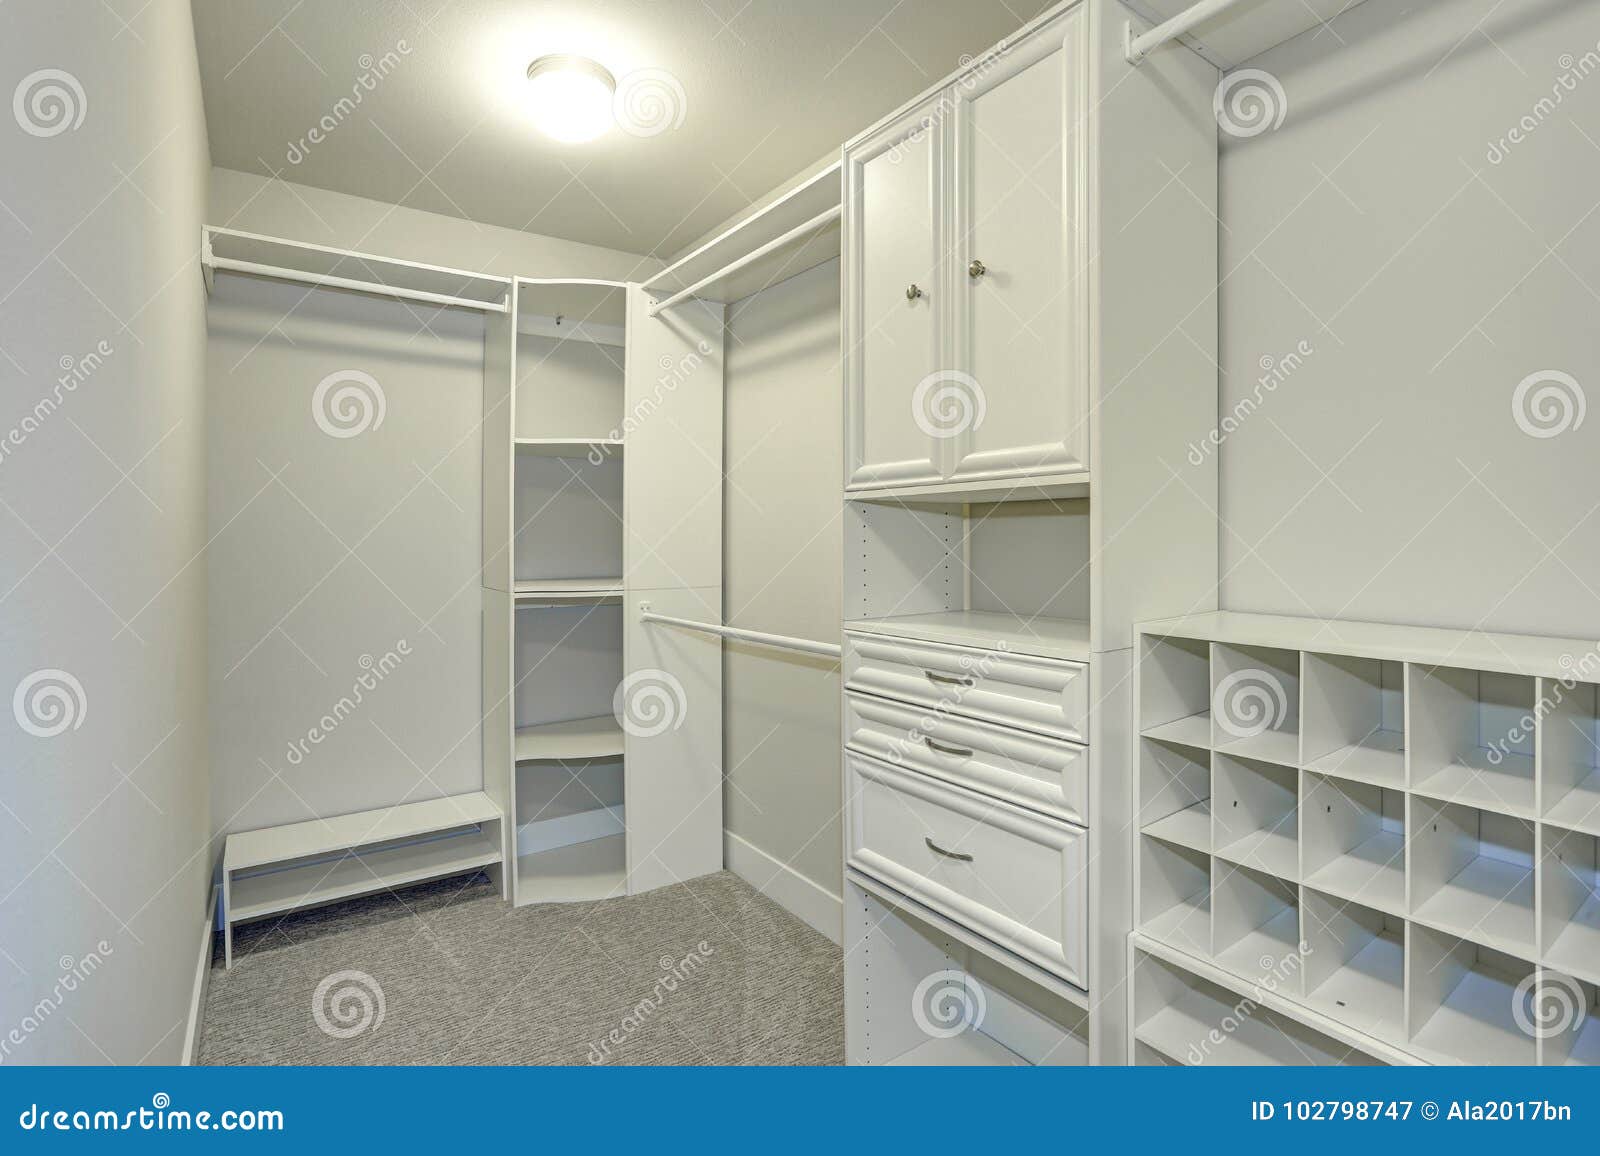 Narrow Walk In Closet Lined With Built In Drawers Stock Image